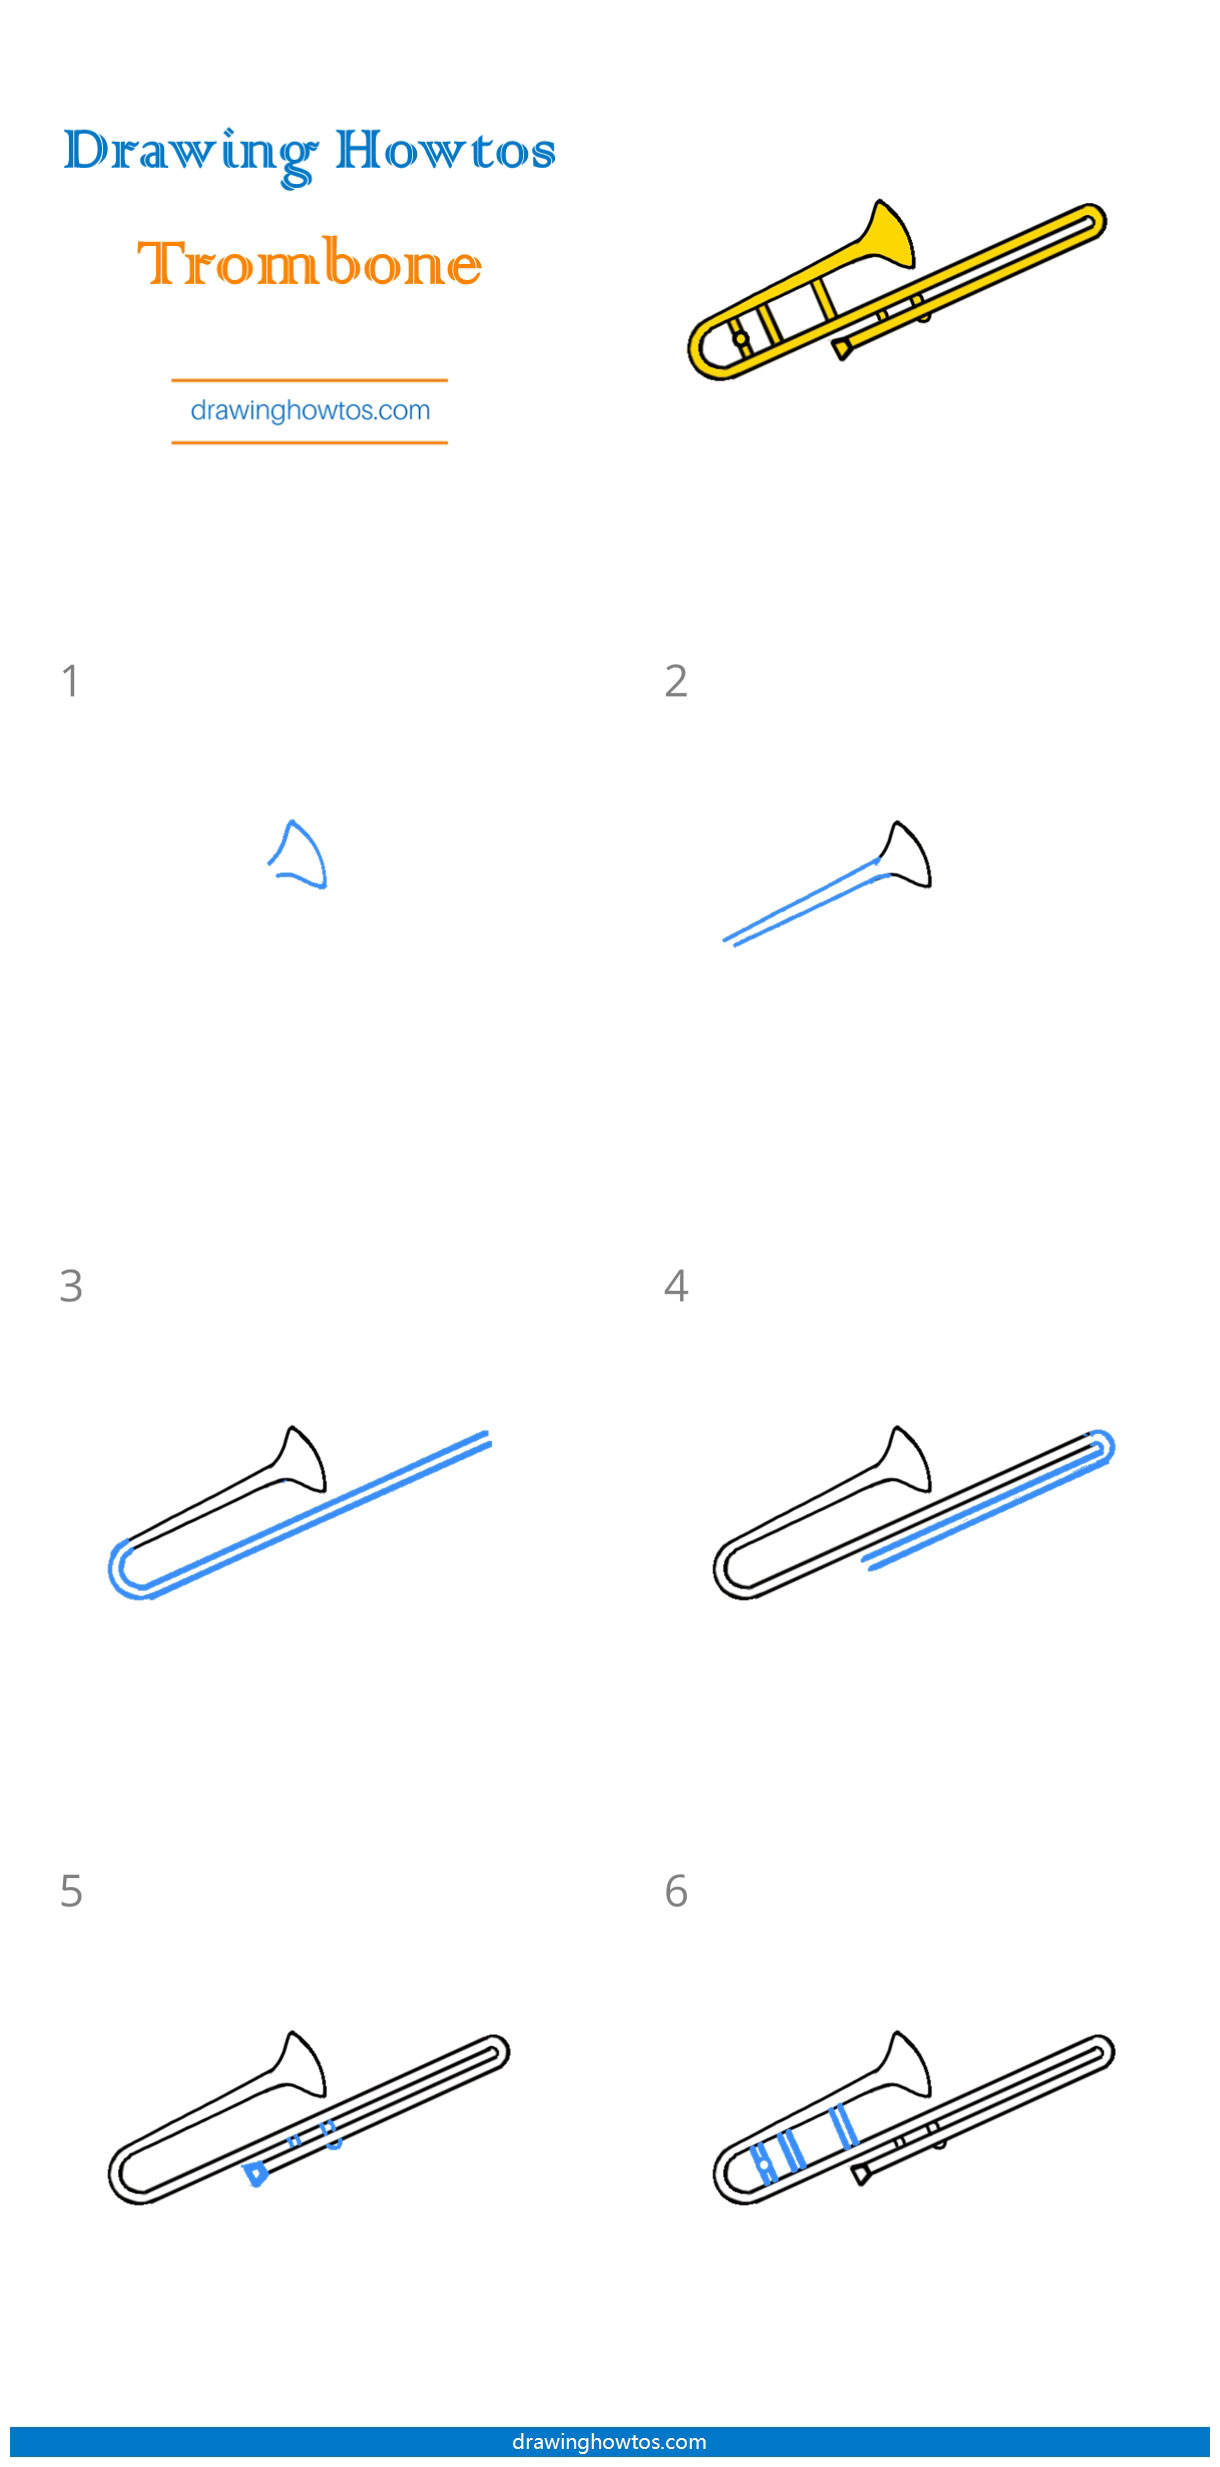 Best How To Draw A Trombone of all time Learn more here 